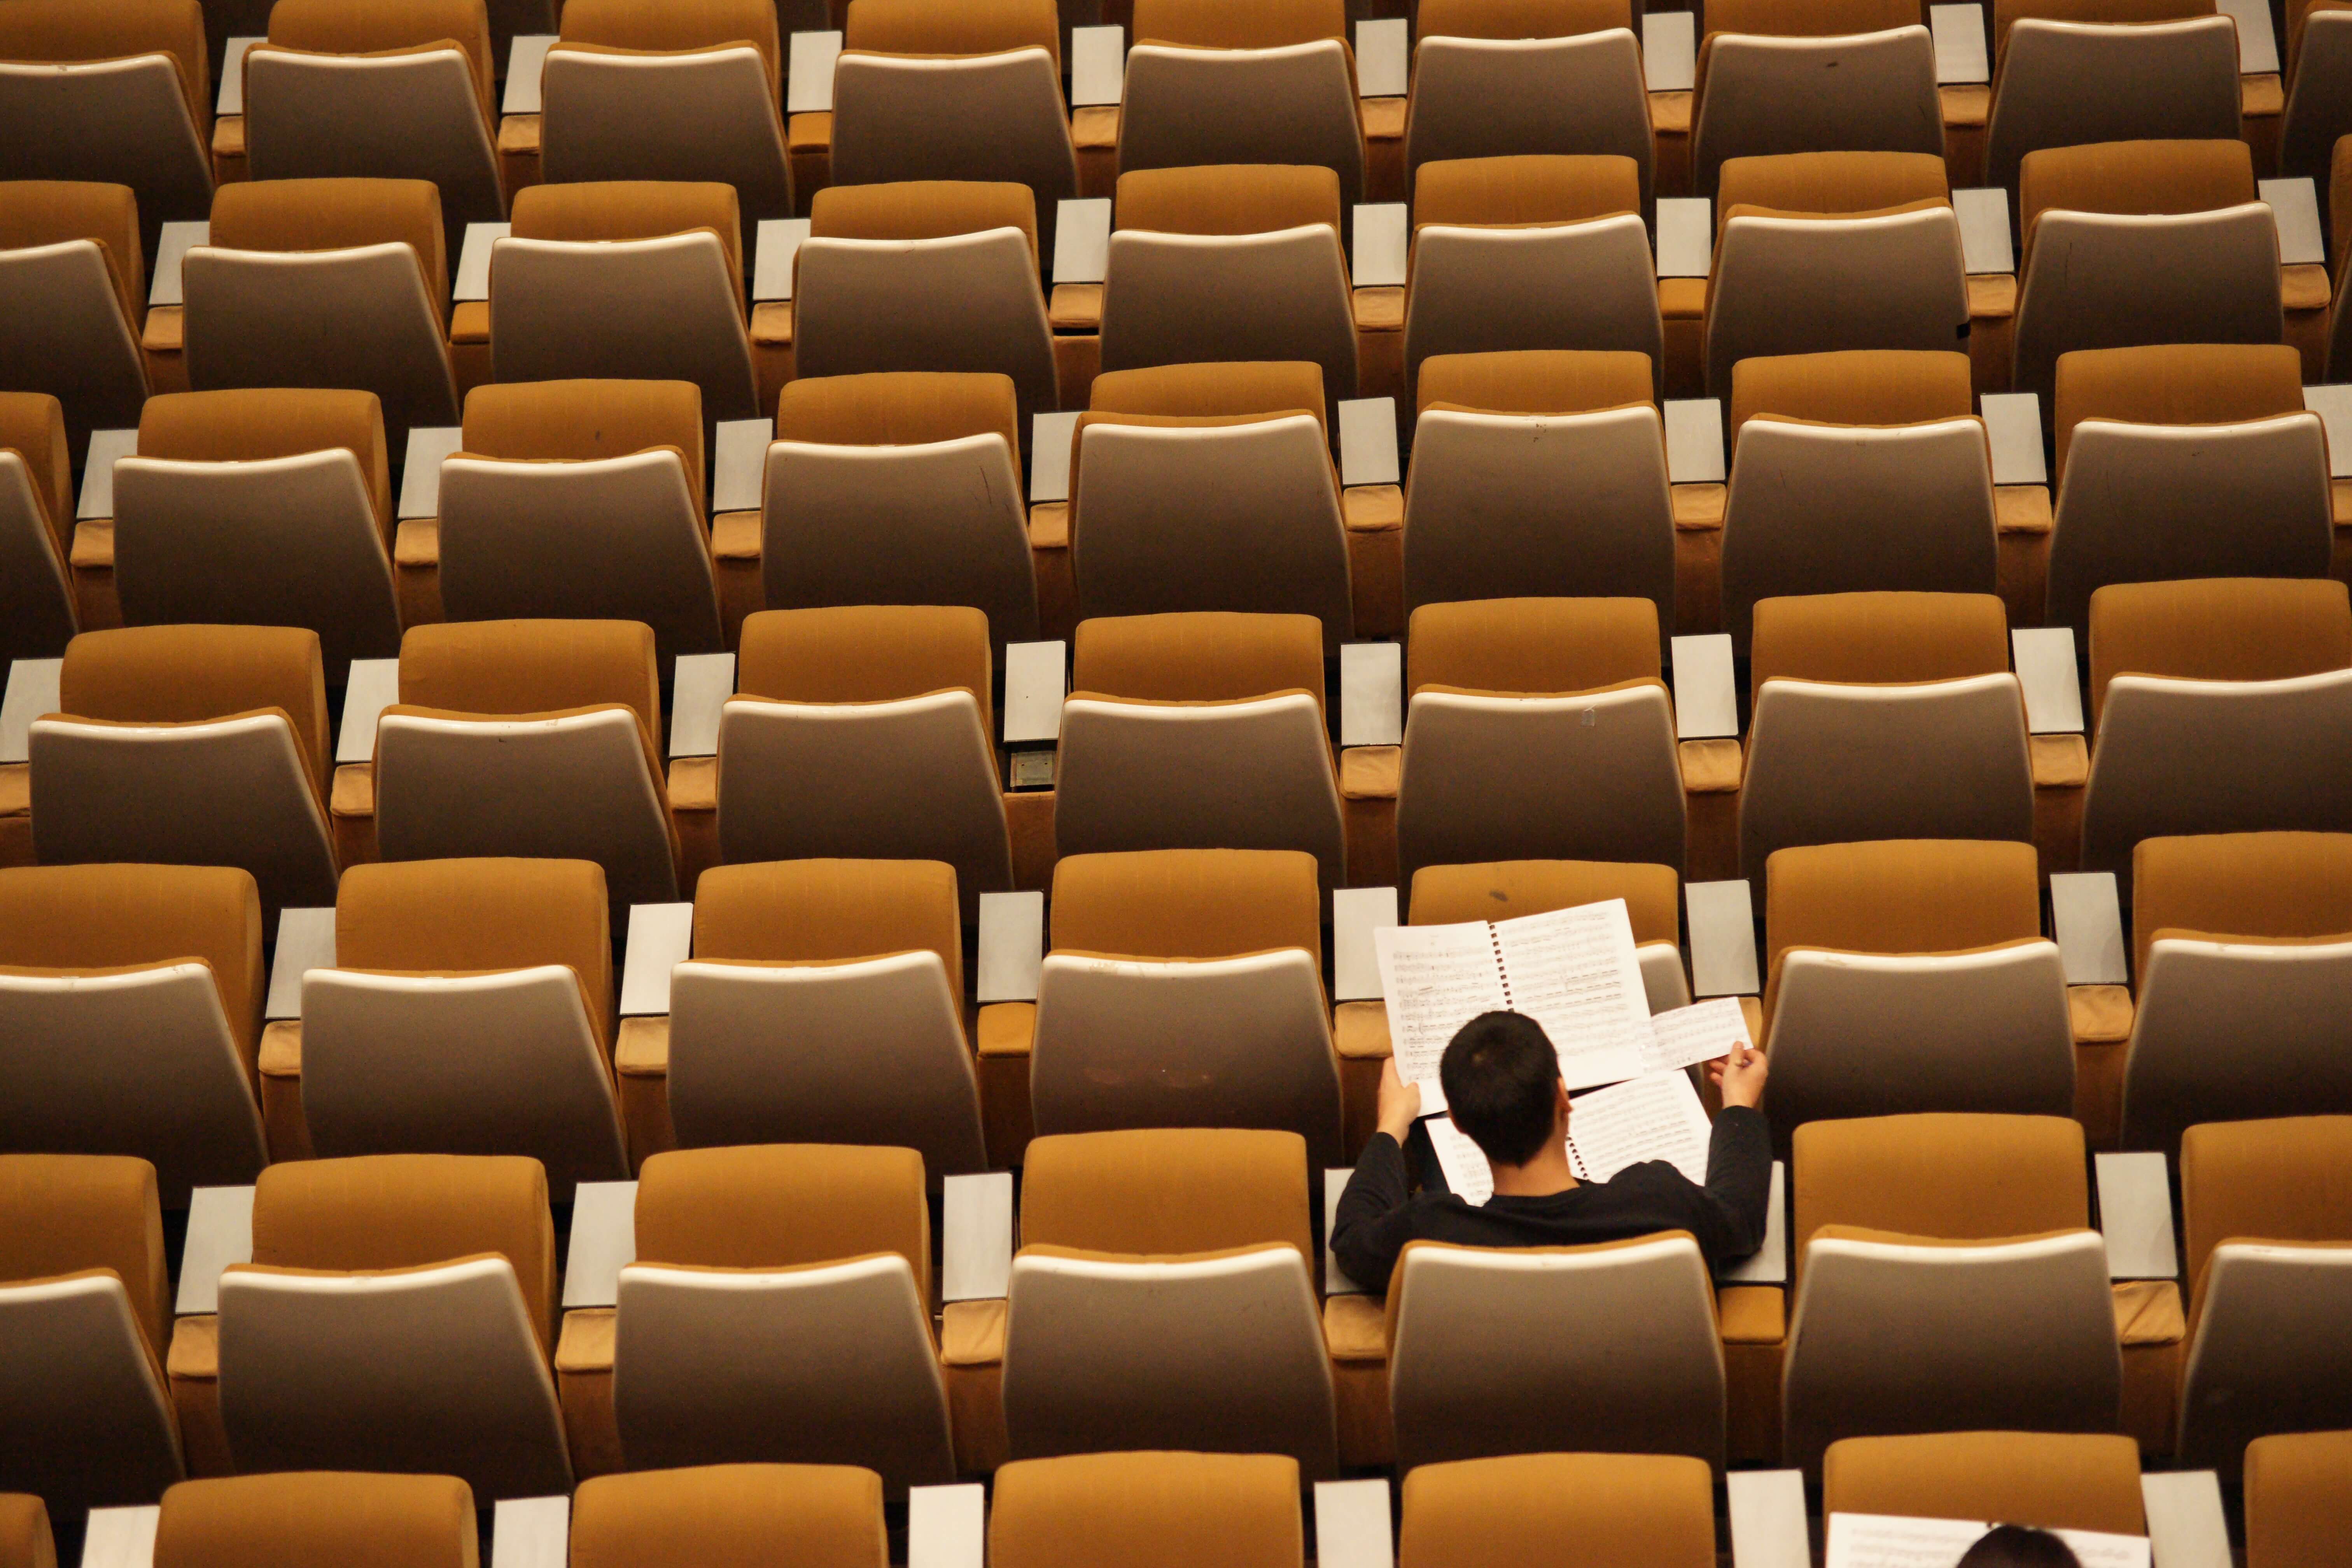 A young adult doing schoolwork in an otherwise empty auditorium